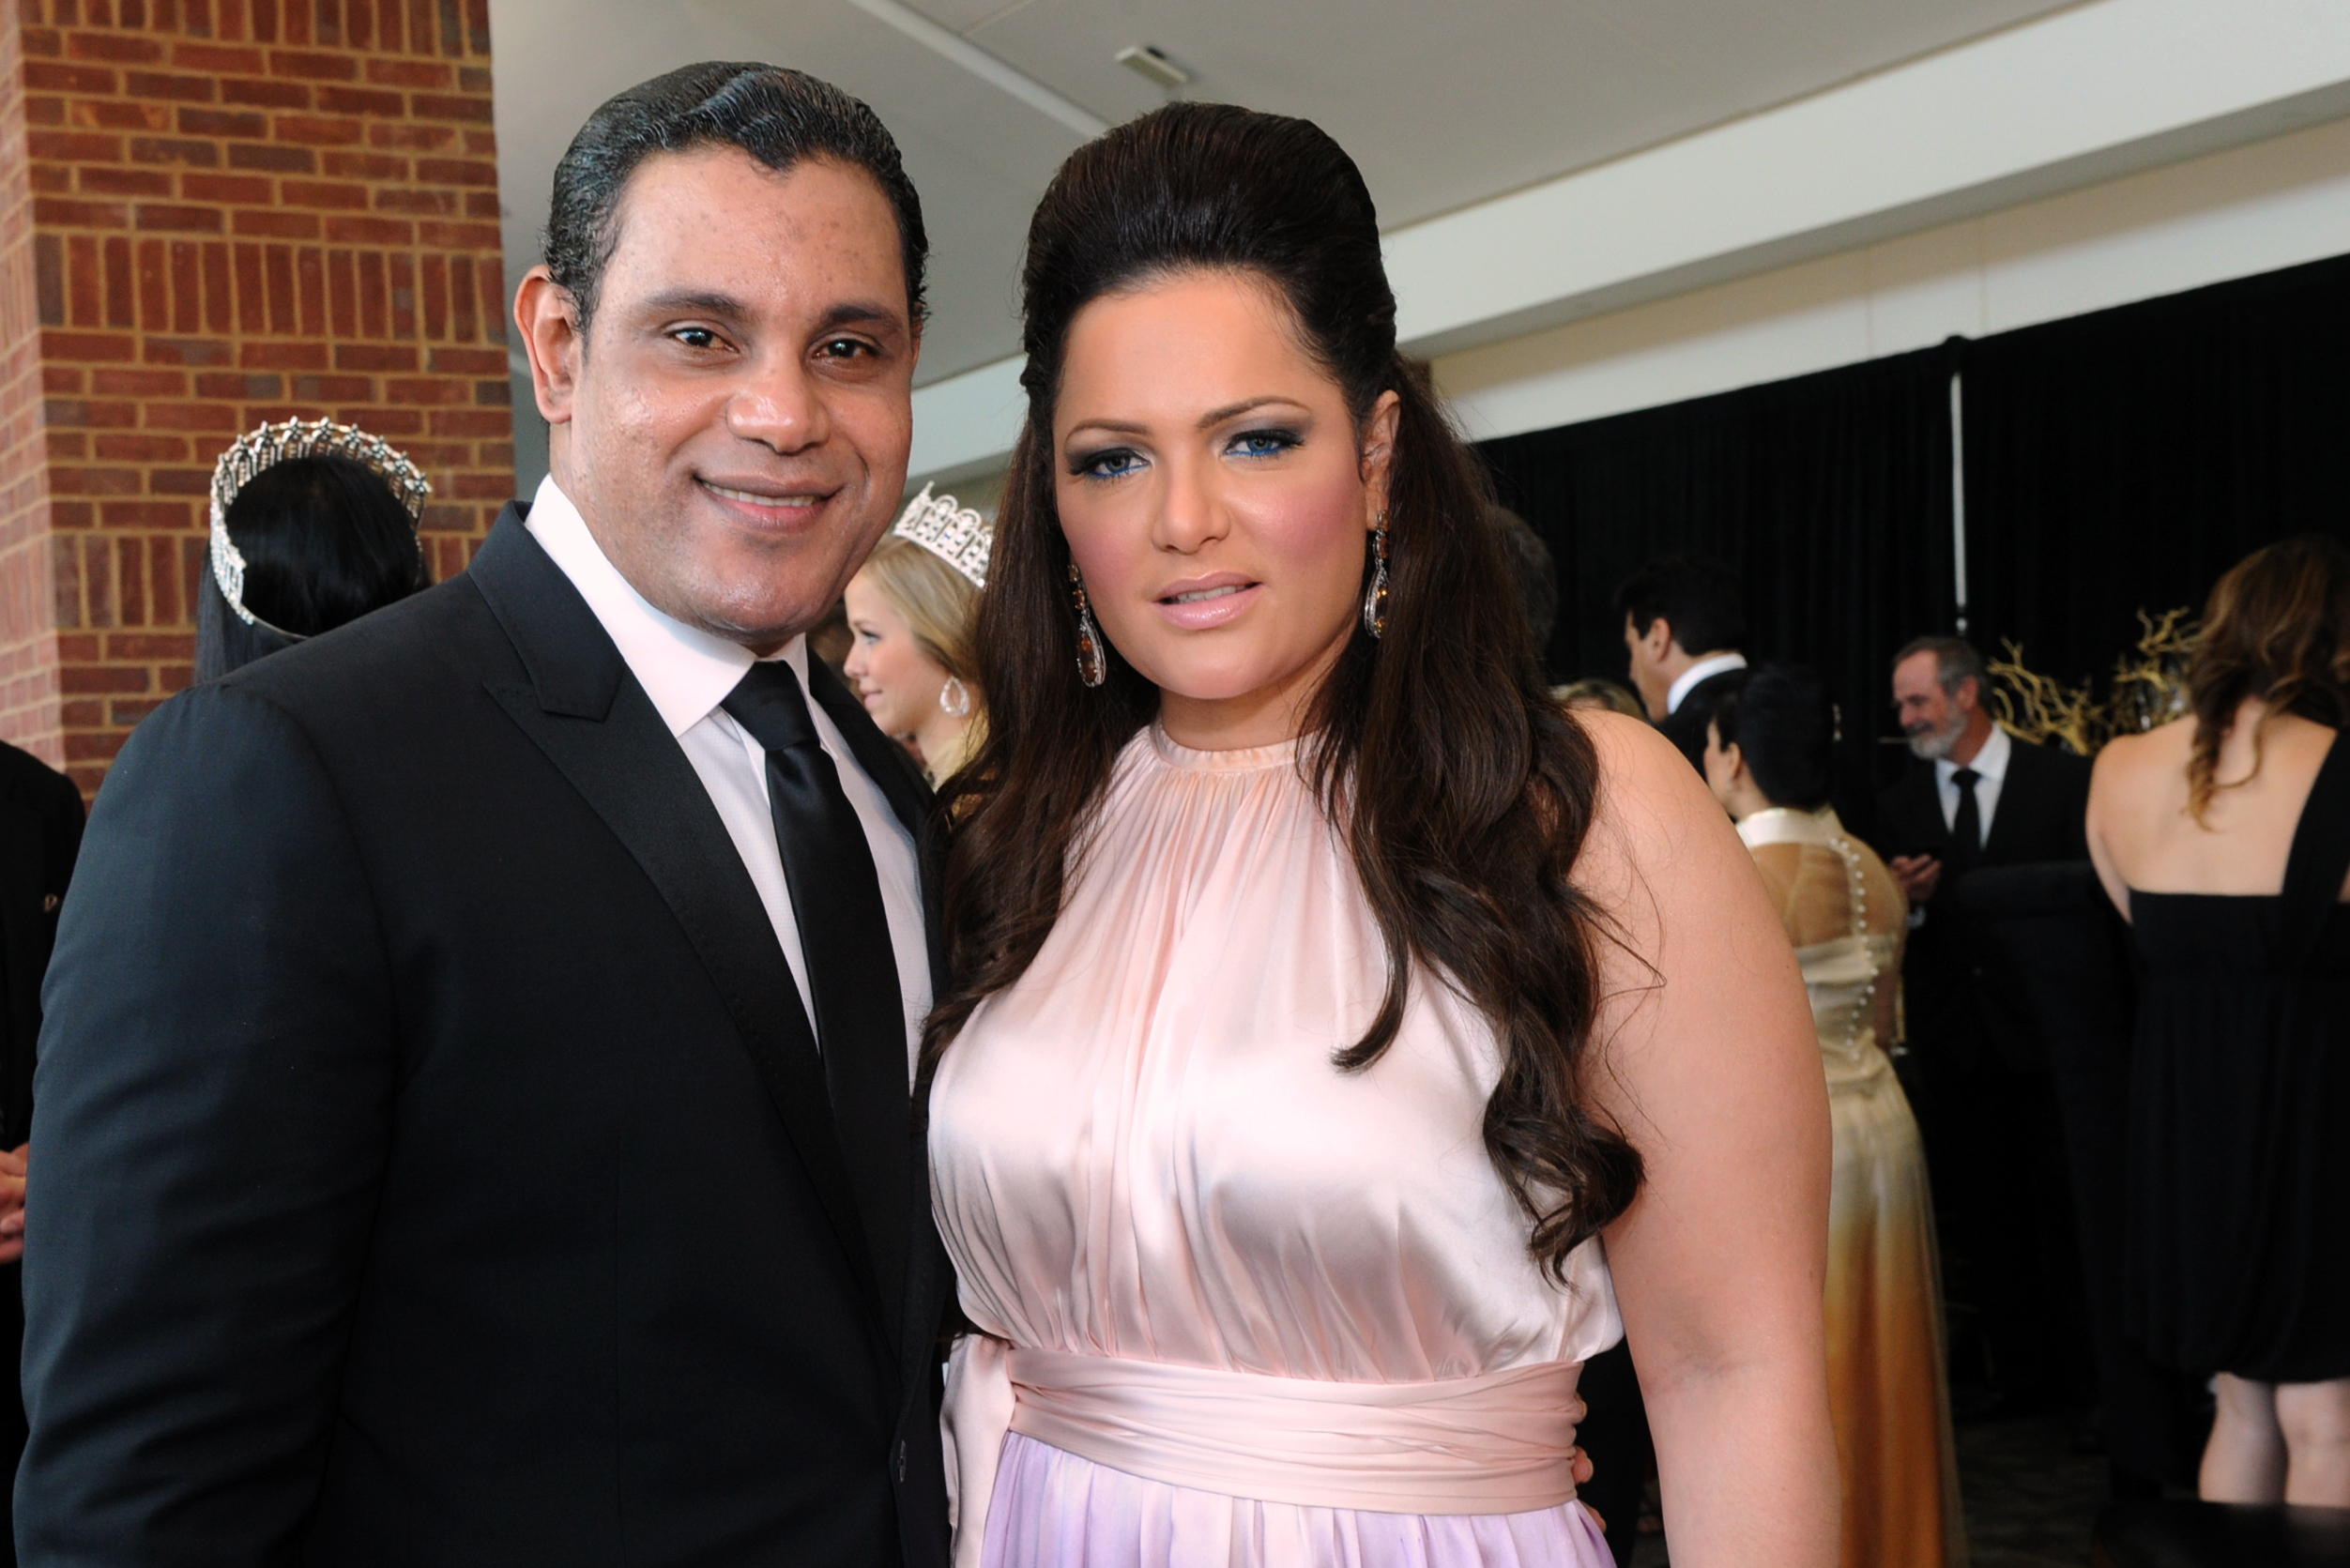 Sammy Sosa in Exile: There's Silence Rather Than Apology from